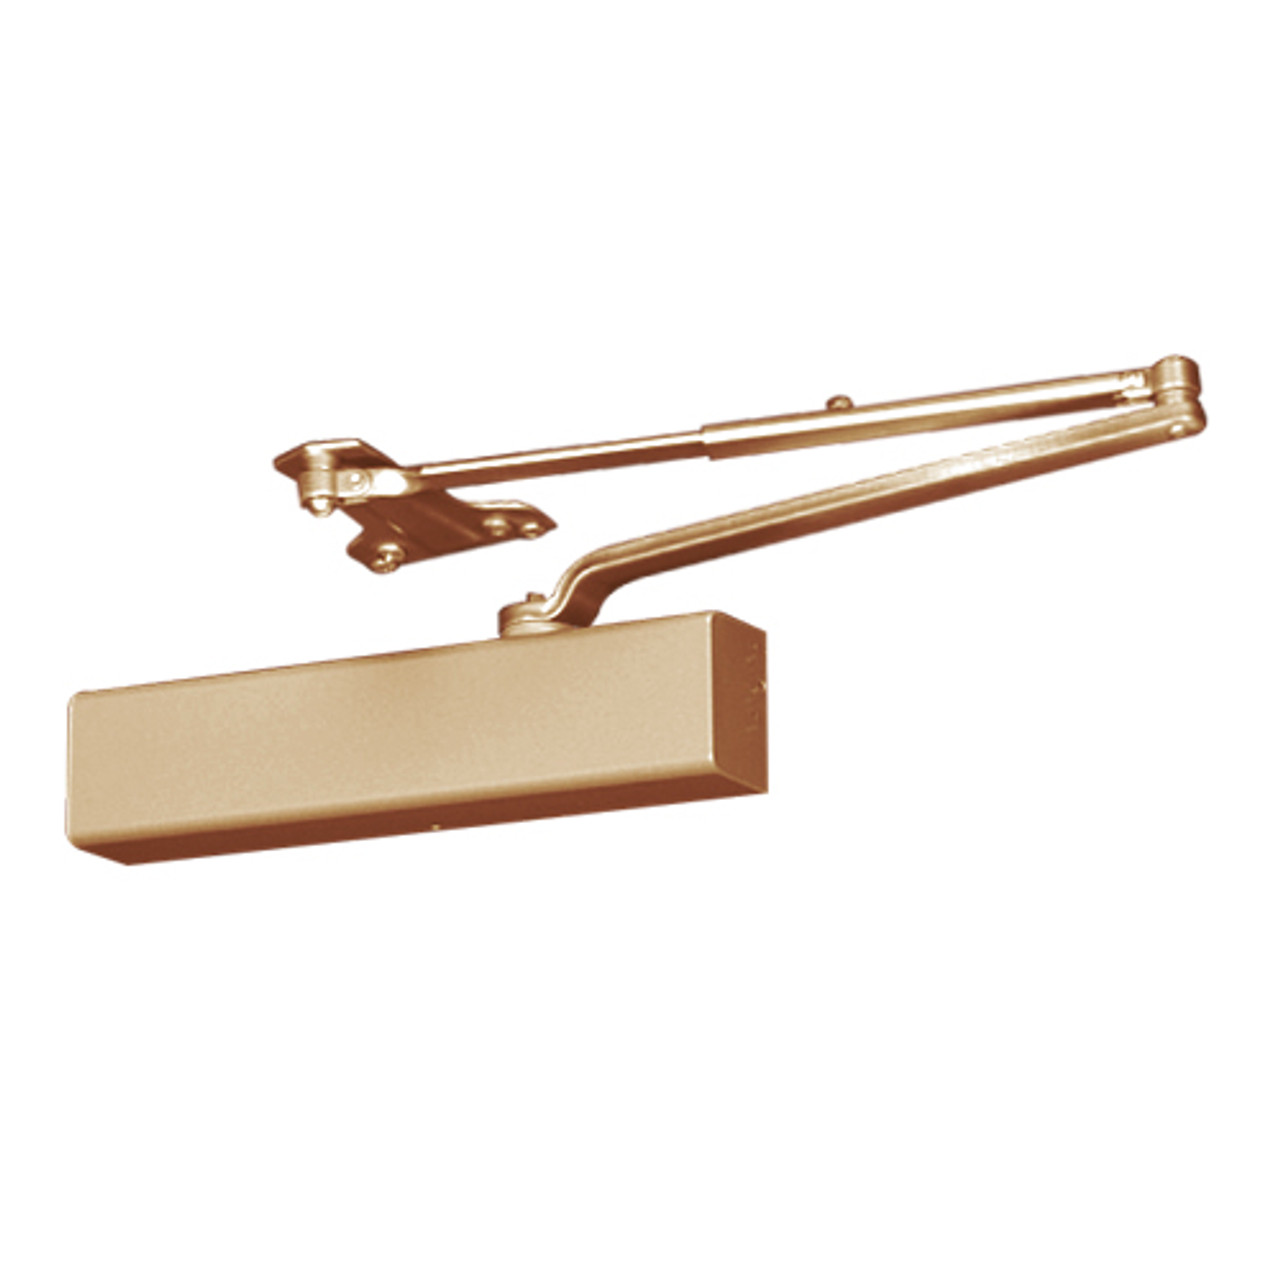 P8581A-691 Norton 8000 Series Full Cover Non-Hold Open Door Closers with Parallel Low Profile Arm in Dull Bronze Finish